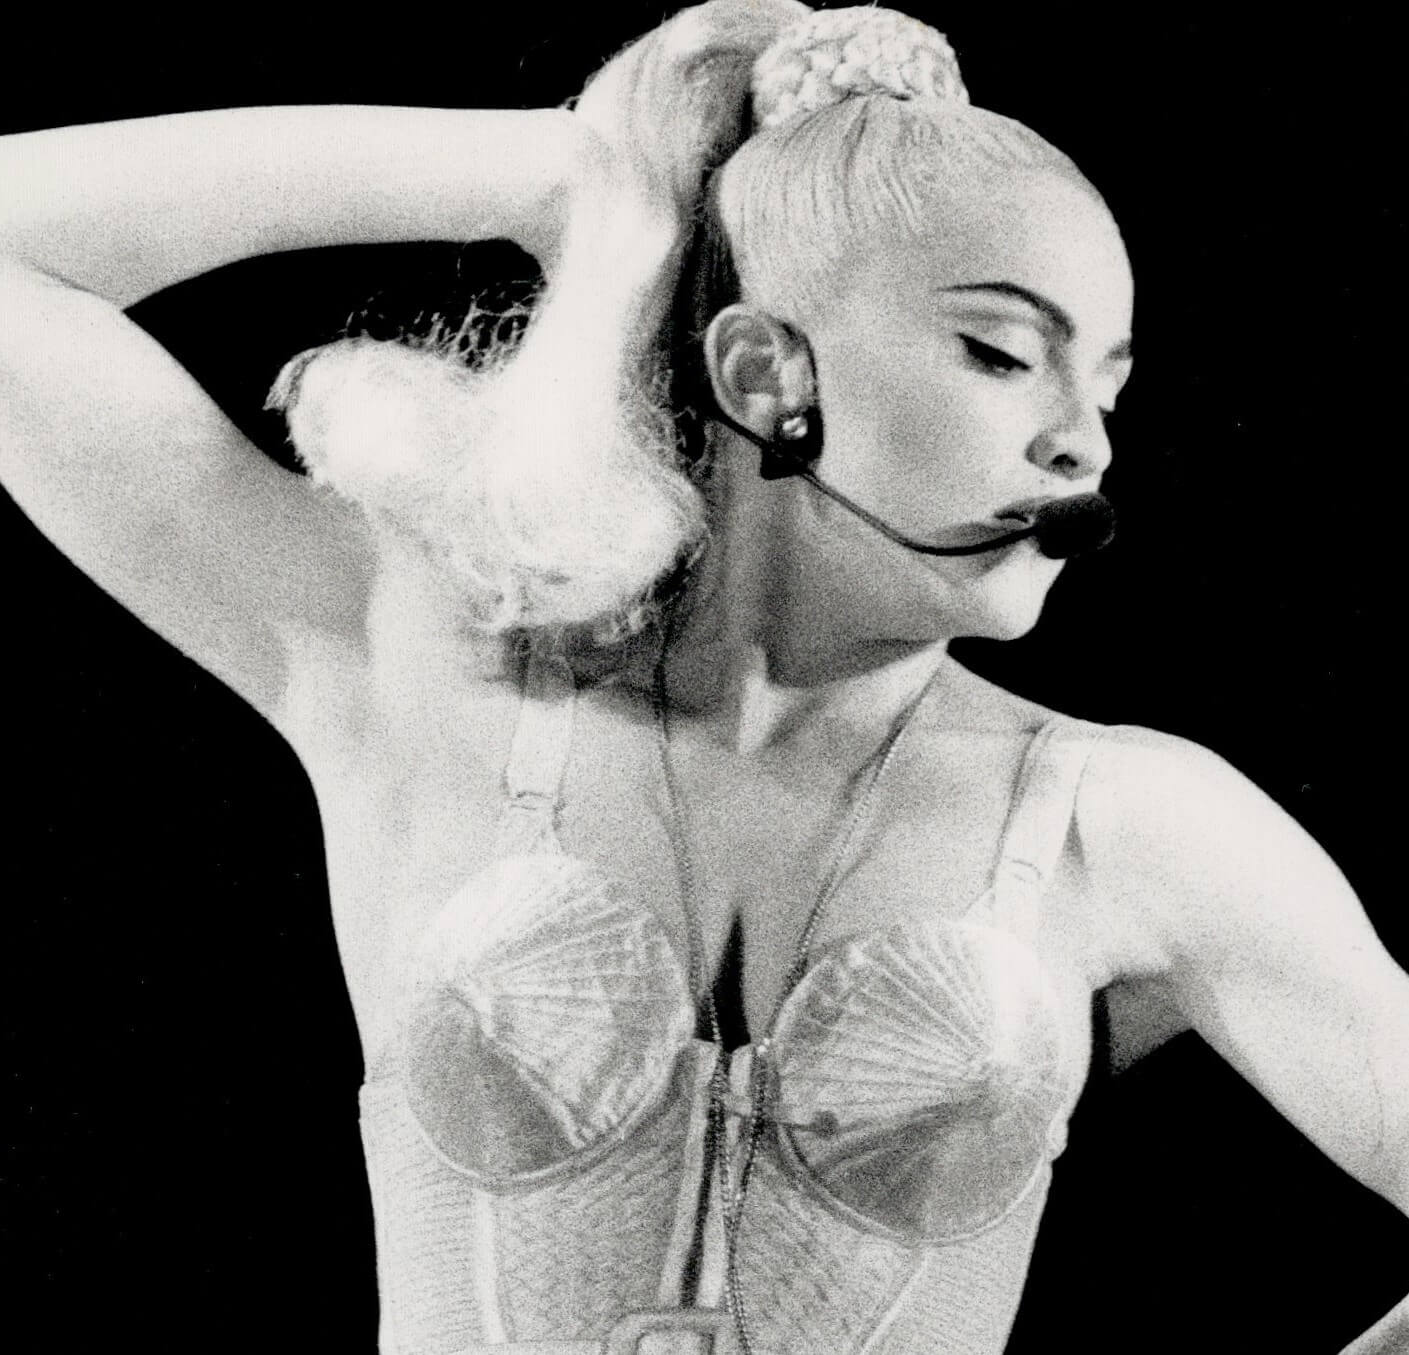 "Express Yourself" singer Madonna in black-and-white